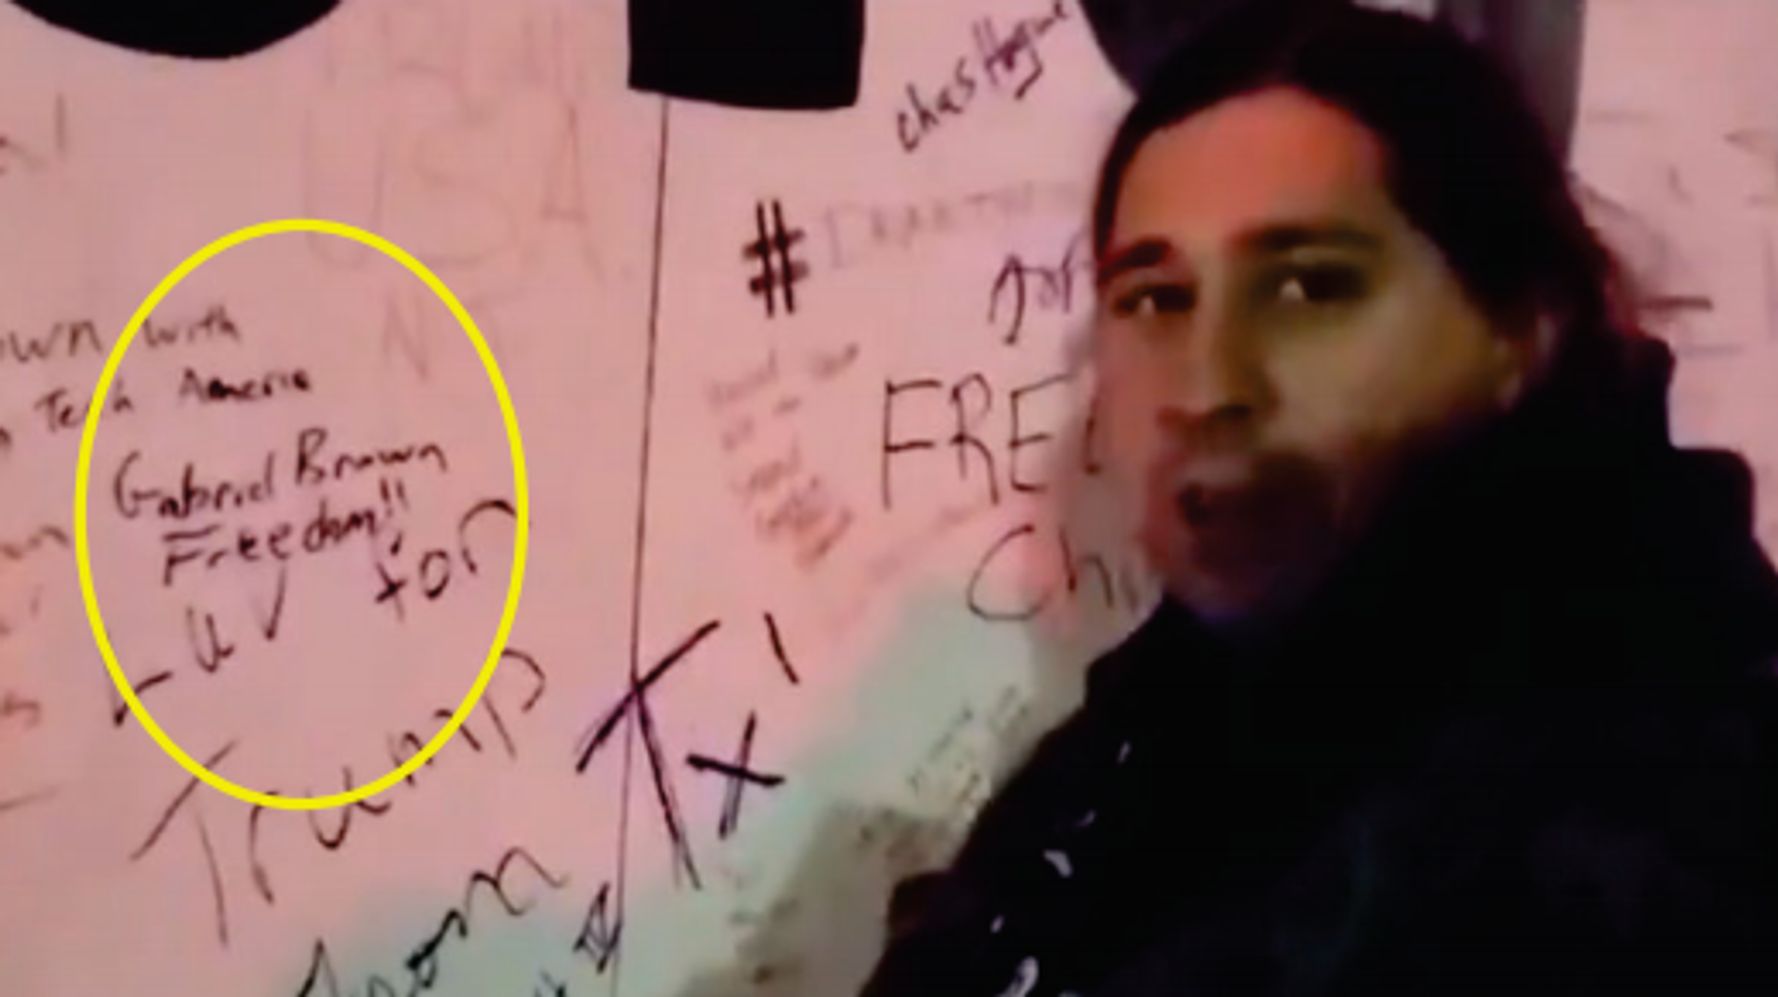 Man Who Signed His Name On Camera During Capitol Riot Is Arrested